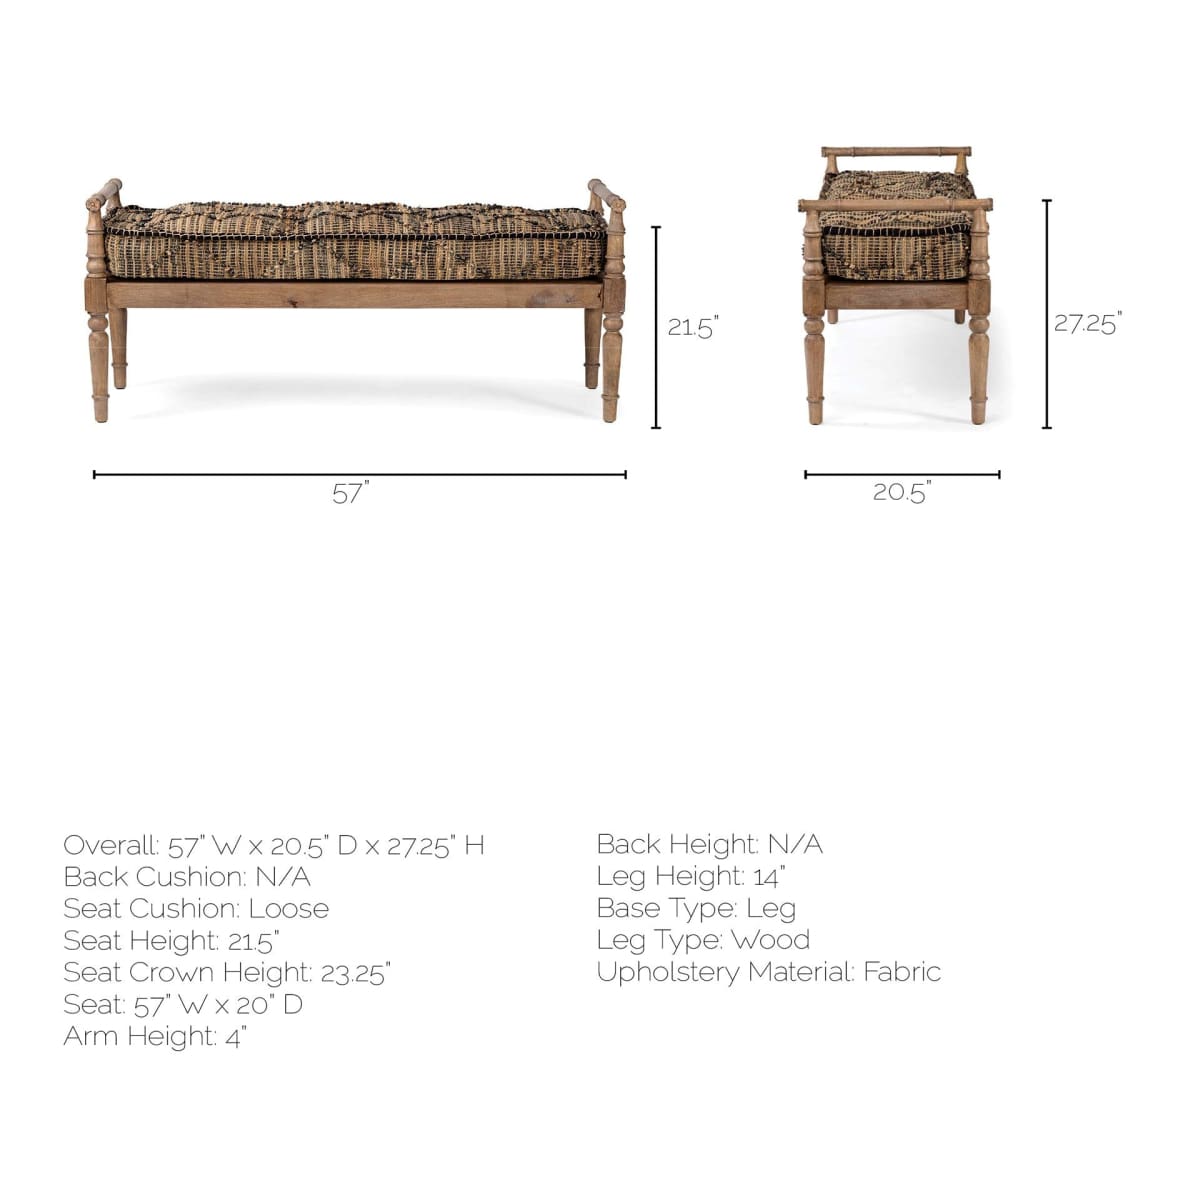 Fullerton Bench Patterned Jute | Brown Wood - benches